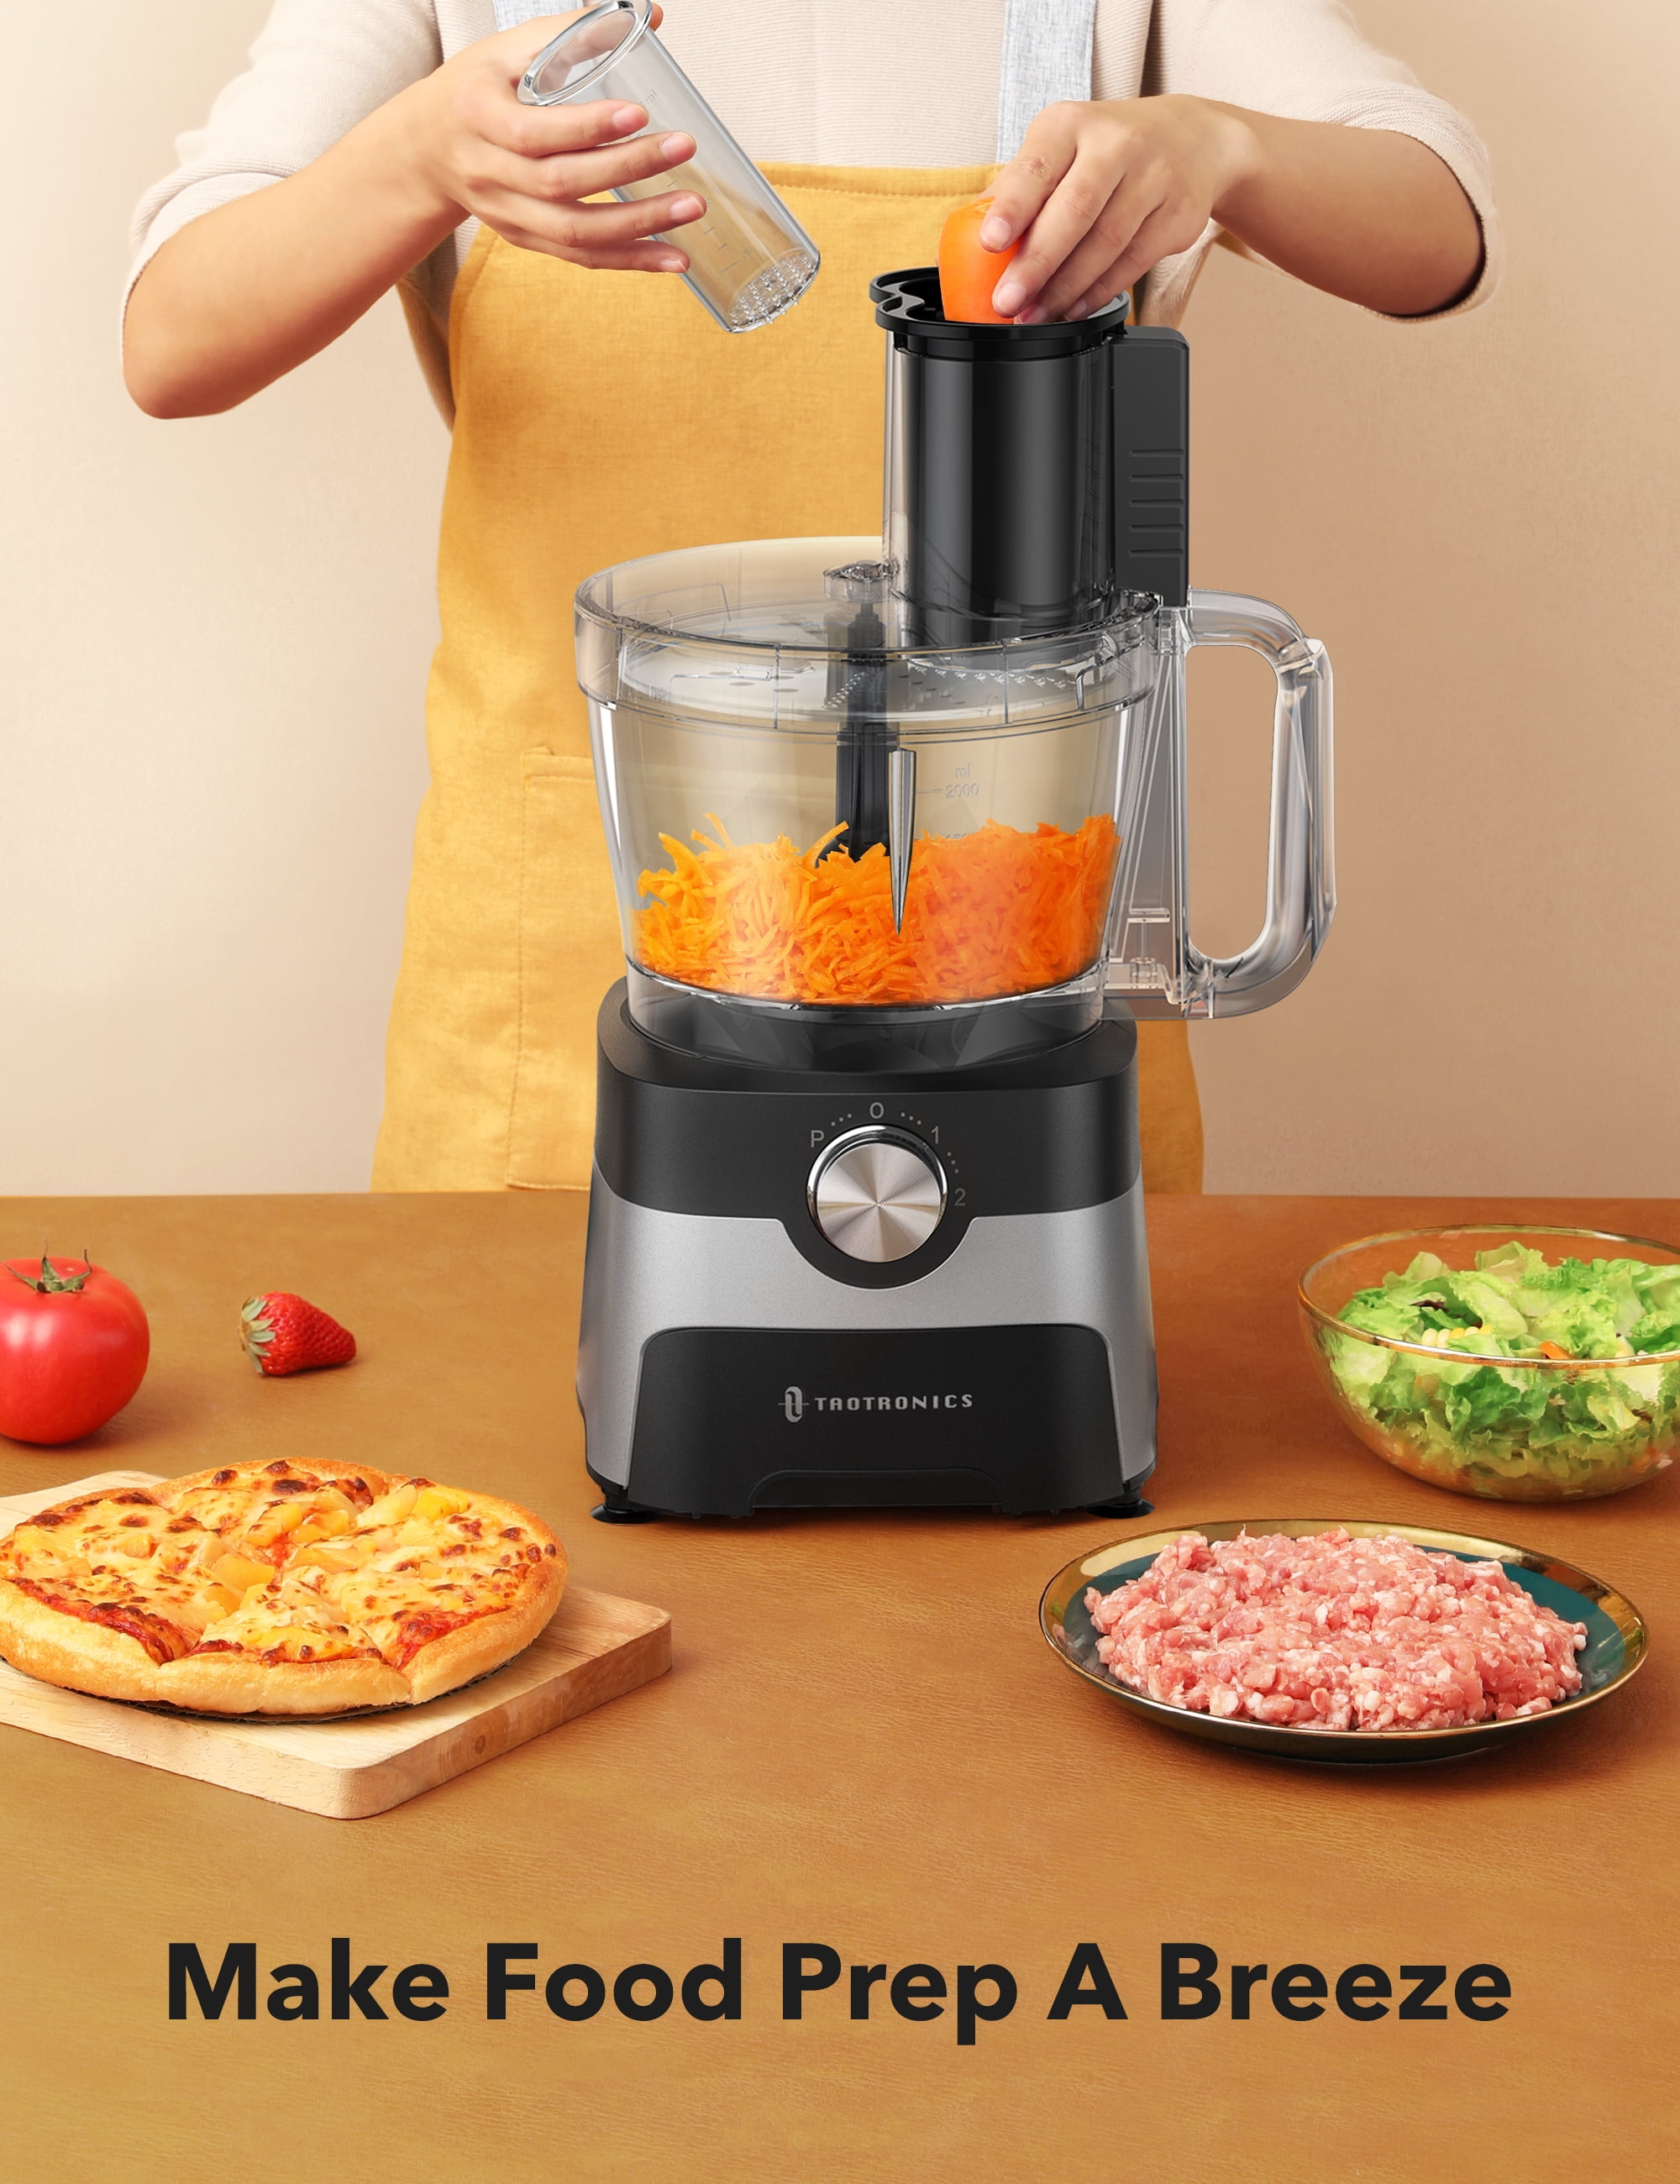  Kognita 13 Cup Food Processor Blender Combo Vegetable Chopper,  Food Processor 500W with 2 Speeds Plus Pulse for Chopping, Slicing, Fine  Grating, With 8-in-1 Multi-function Grinding Cup and Mixing Cup: Home